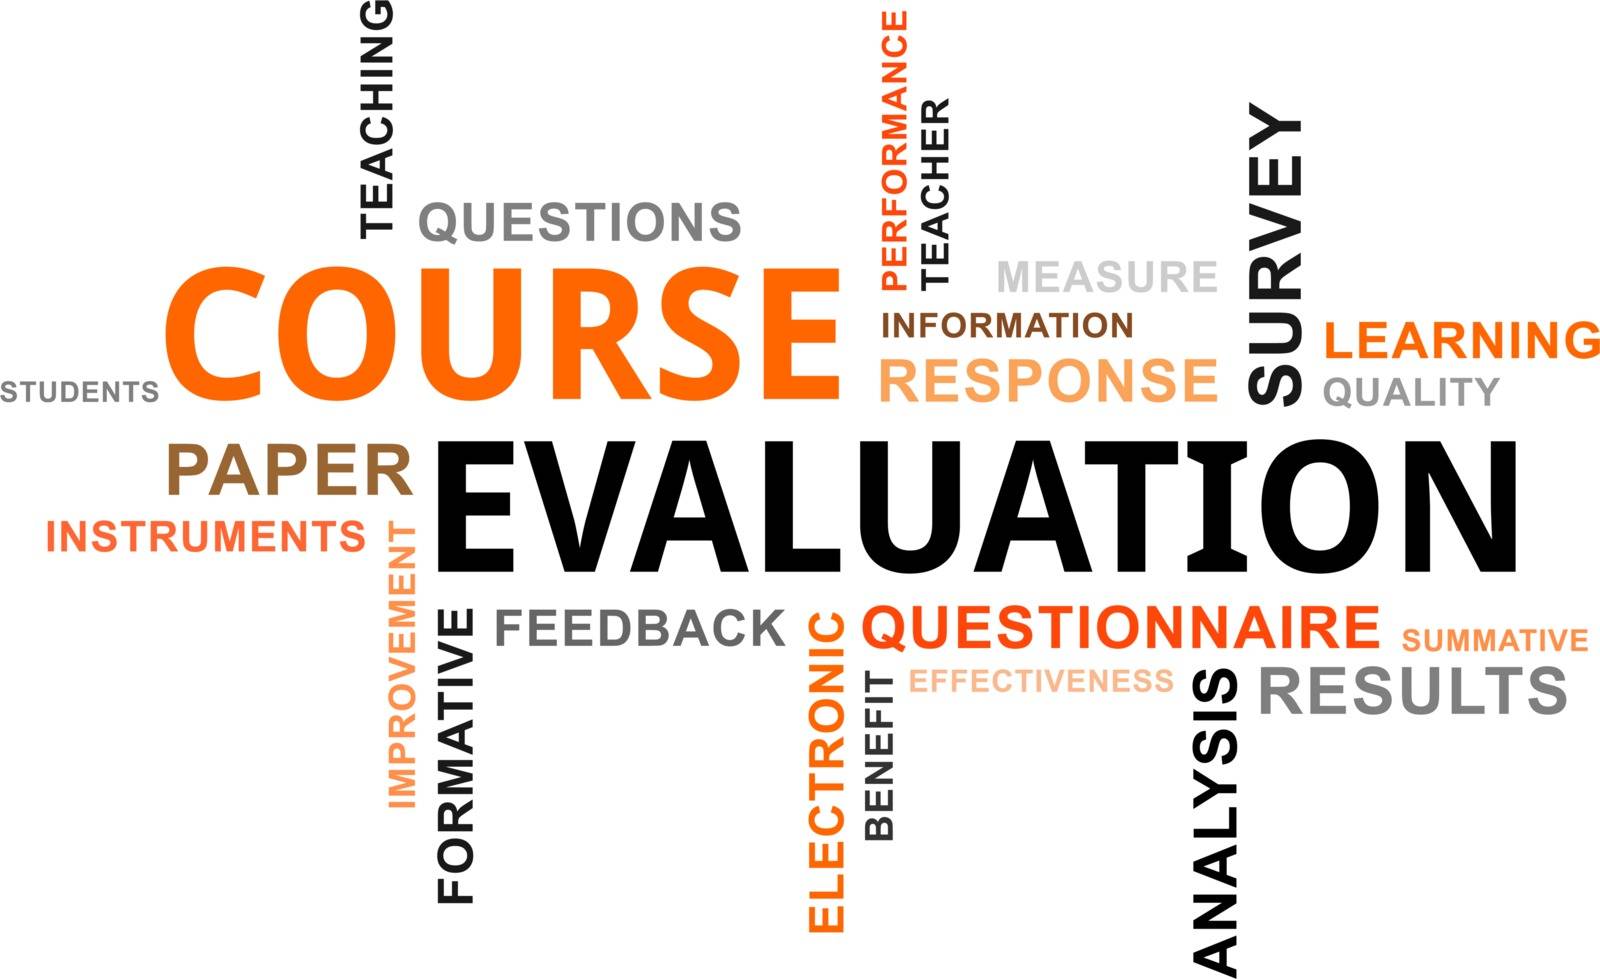 A word cloud of course evaluation related items